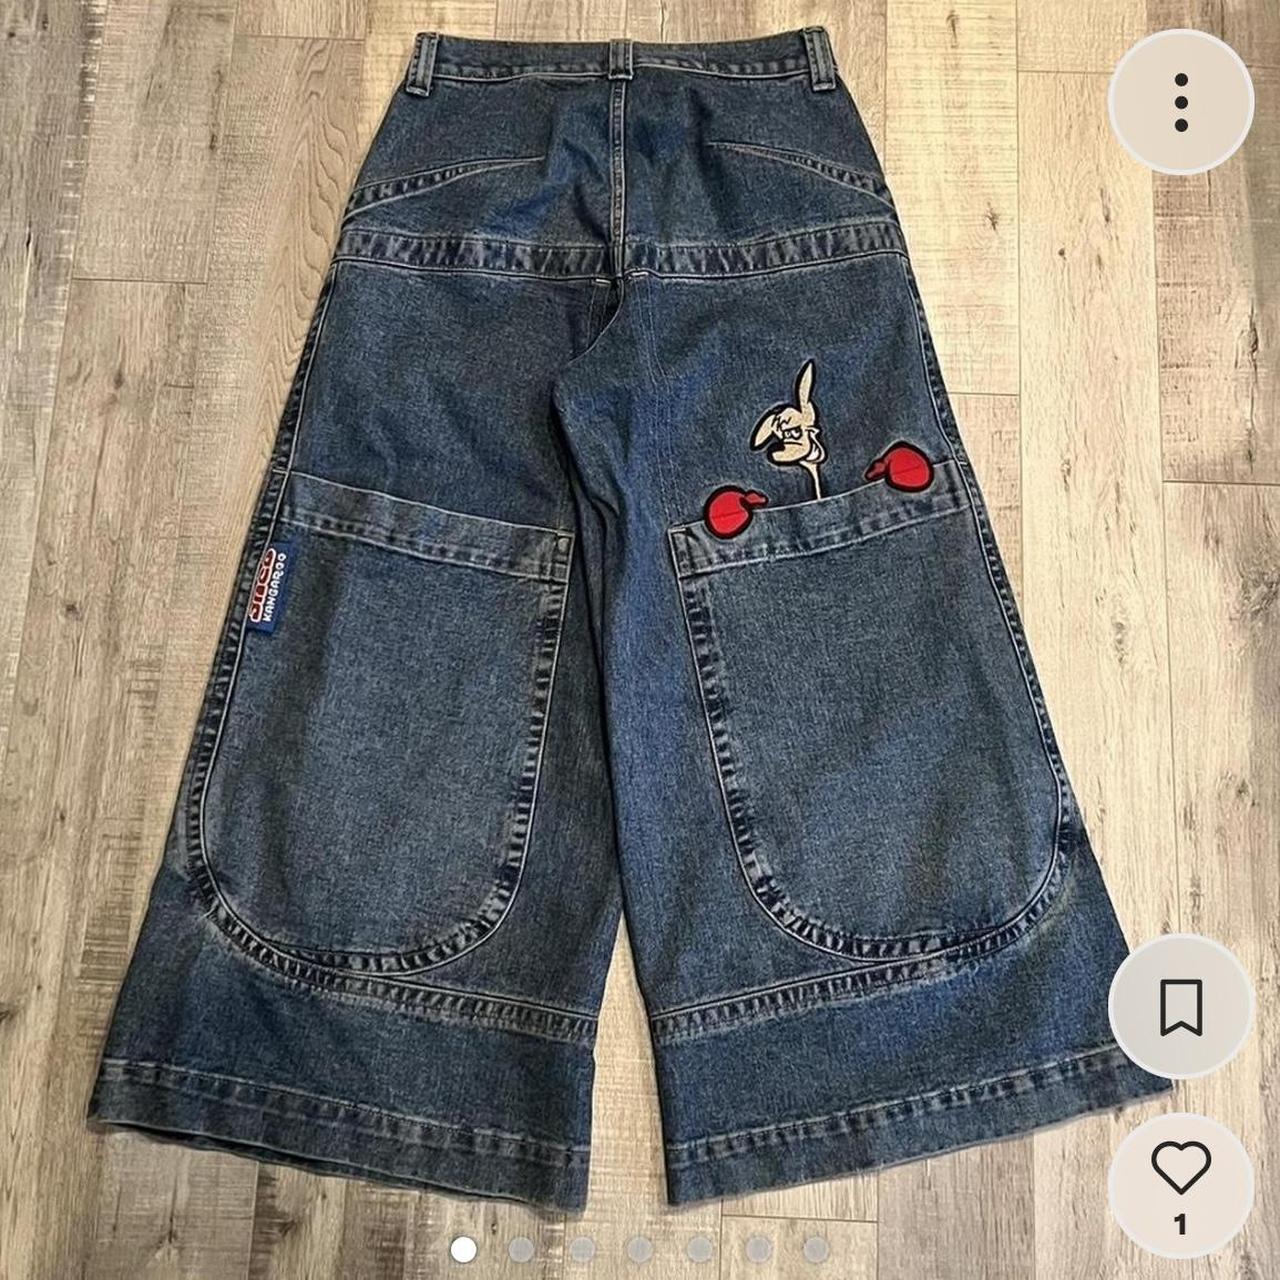 JNCO Kangaroos Near perfect condition Pics are from... - Depop